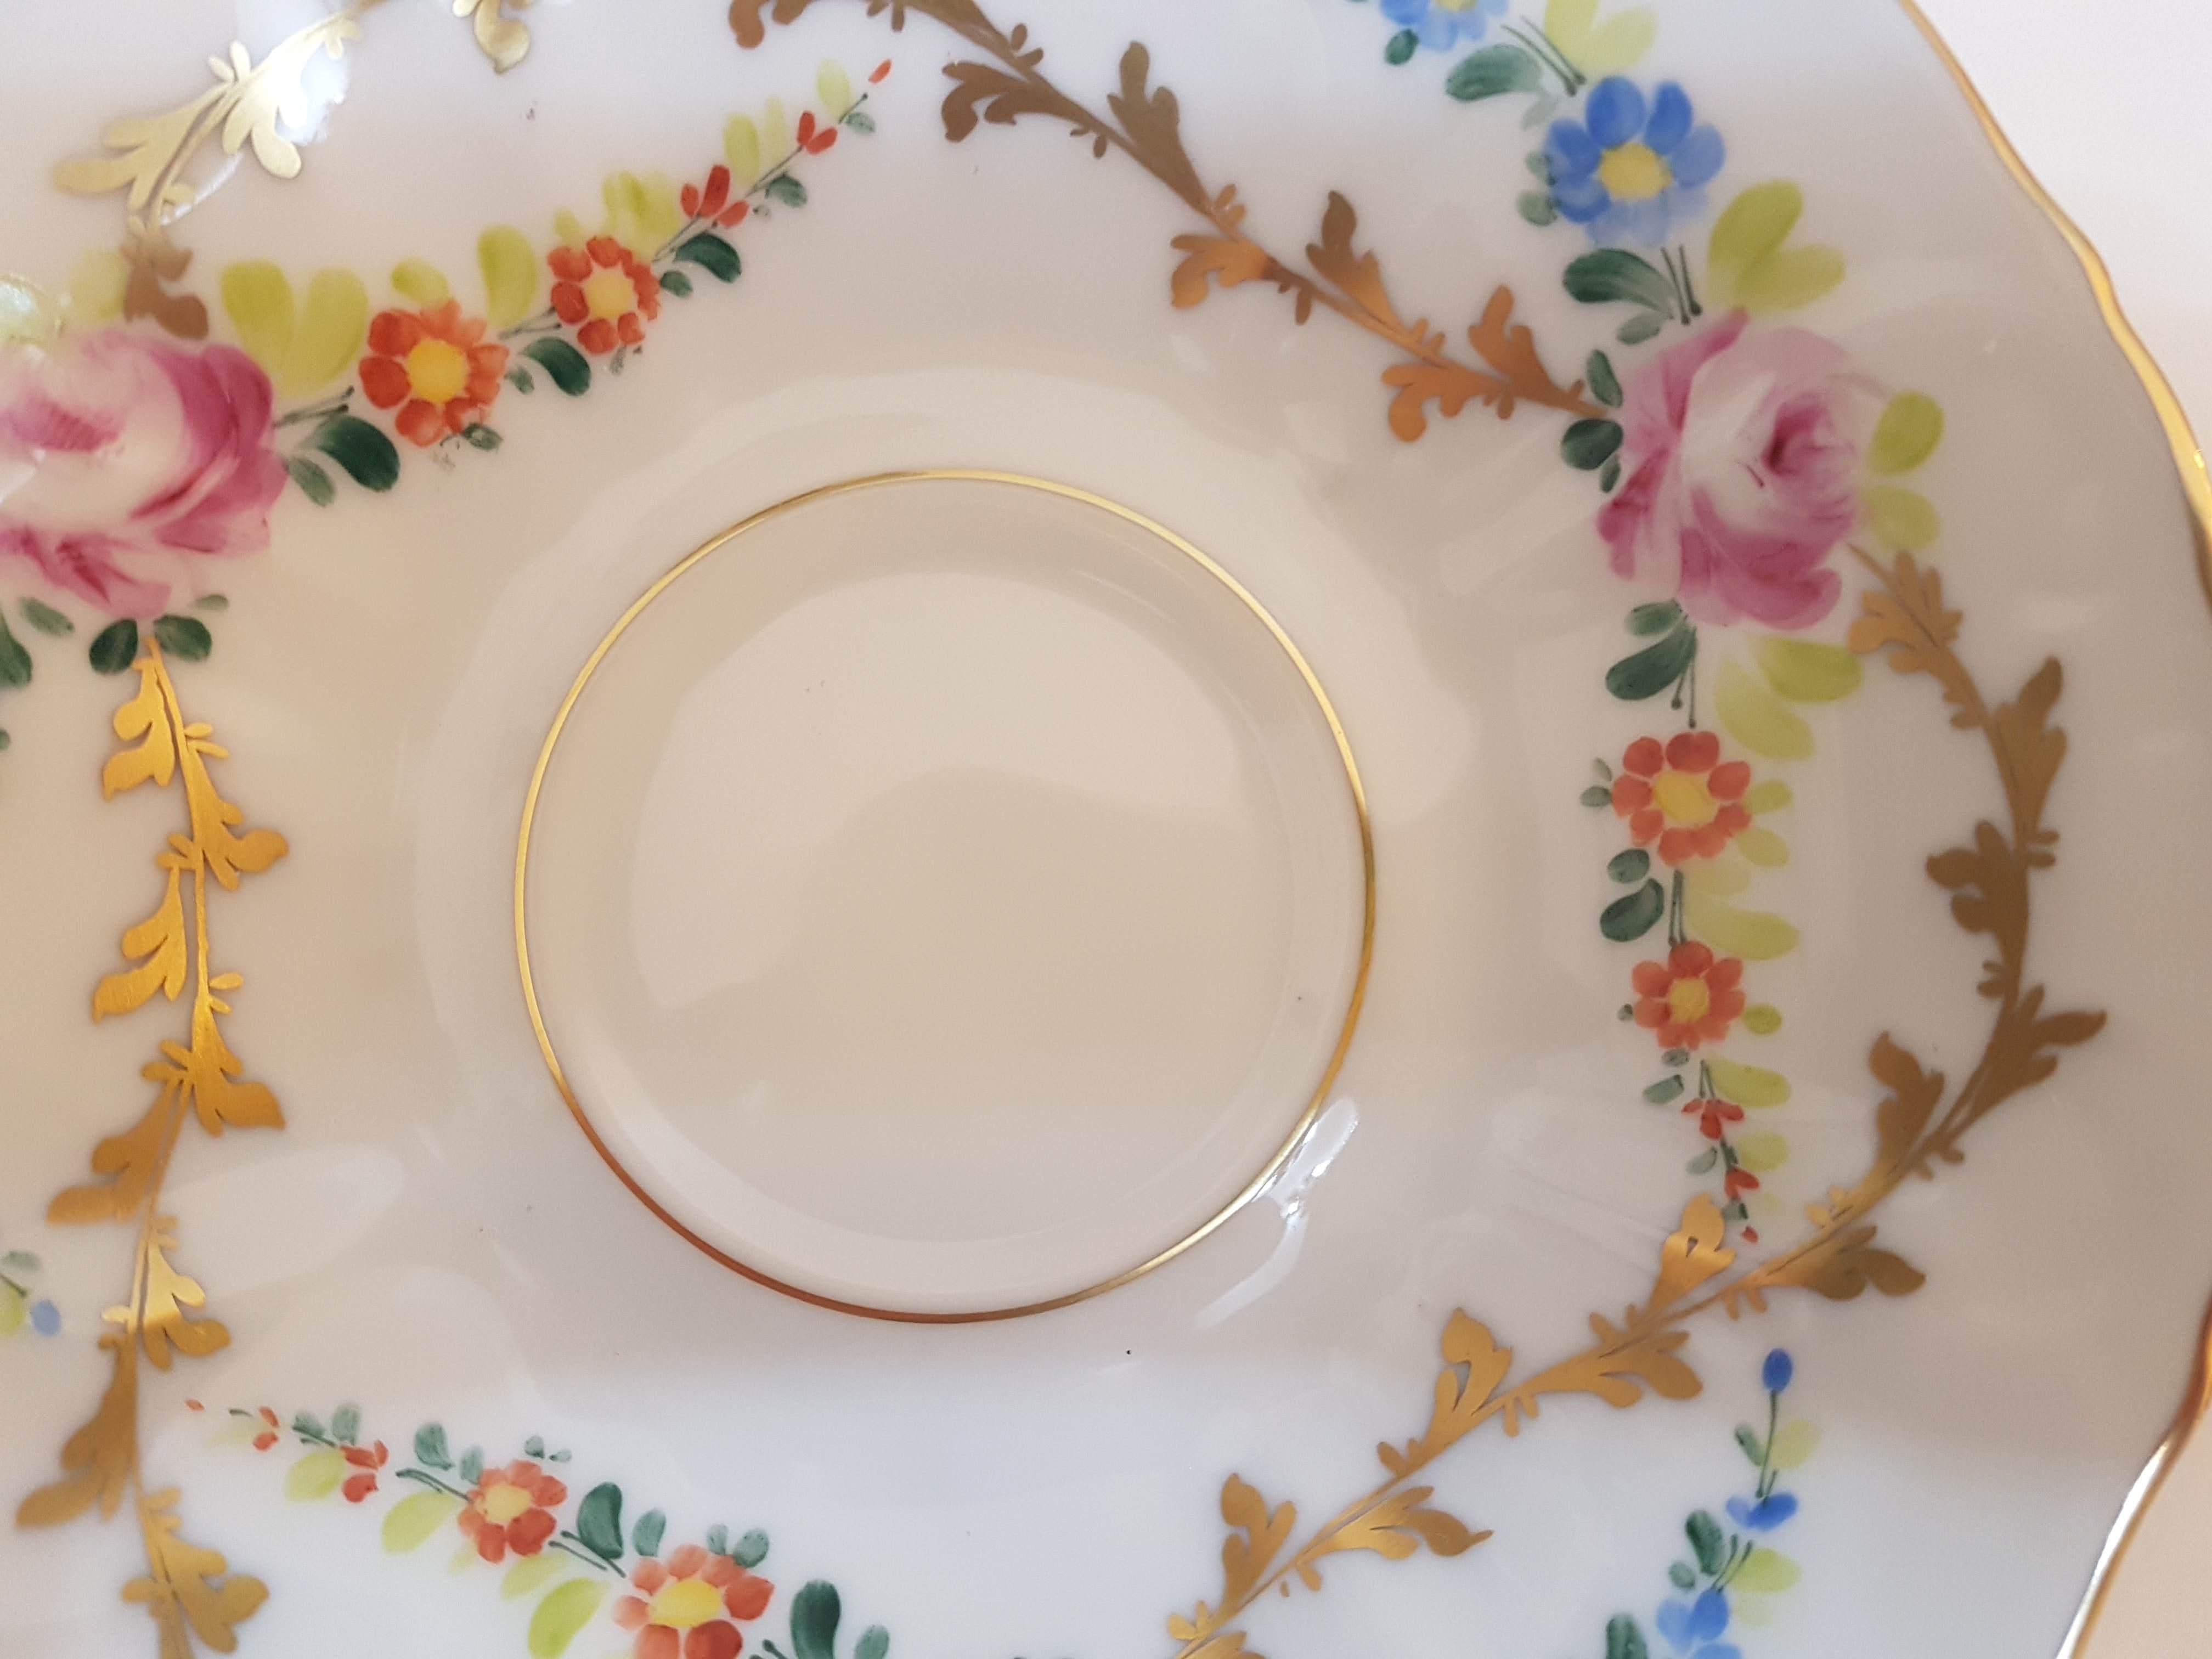 Late 20th Century 20th Century Hand-Painted Vista Alegre Porcelain Collectible Tea Cup and Saucer